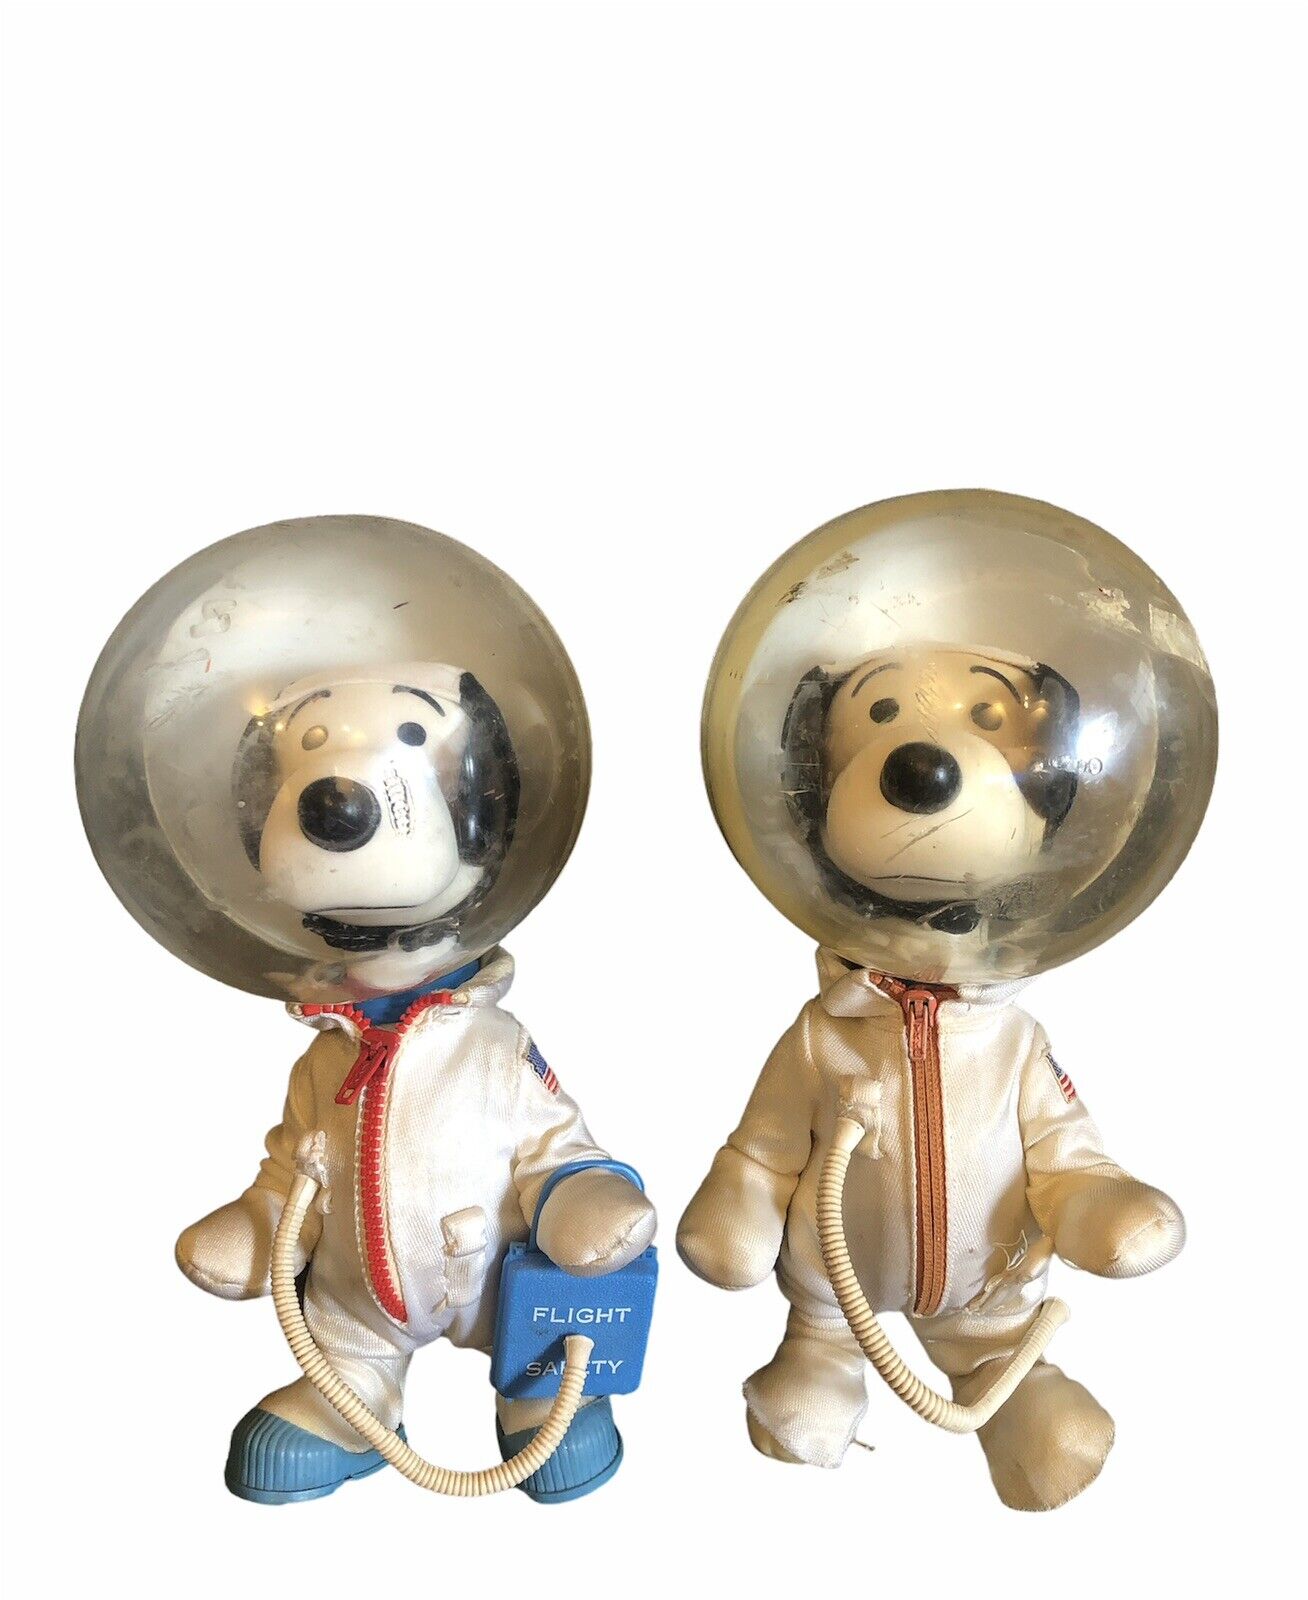 Vintage 1960s Snoopy Astronuat Spaceman Lot of 2